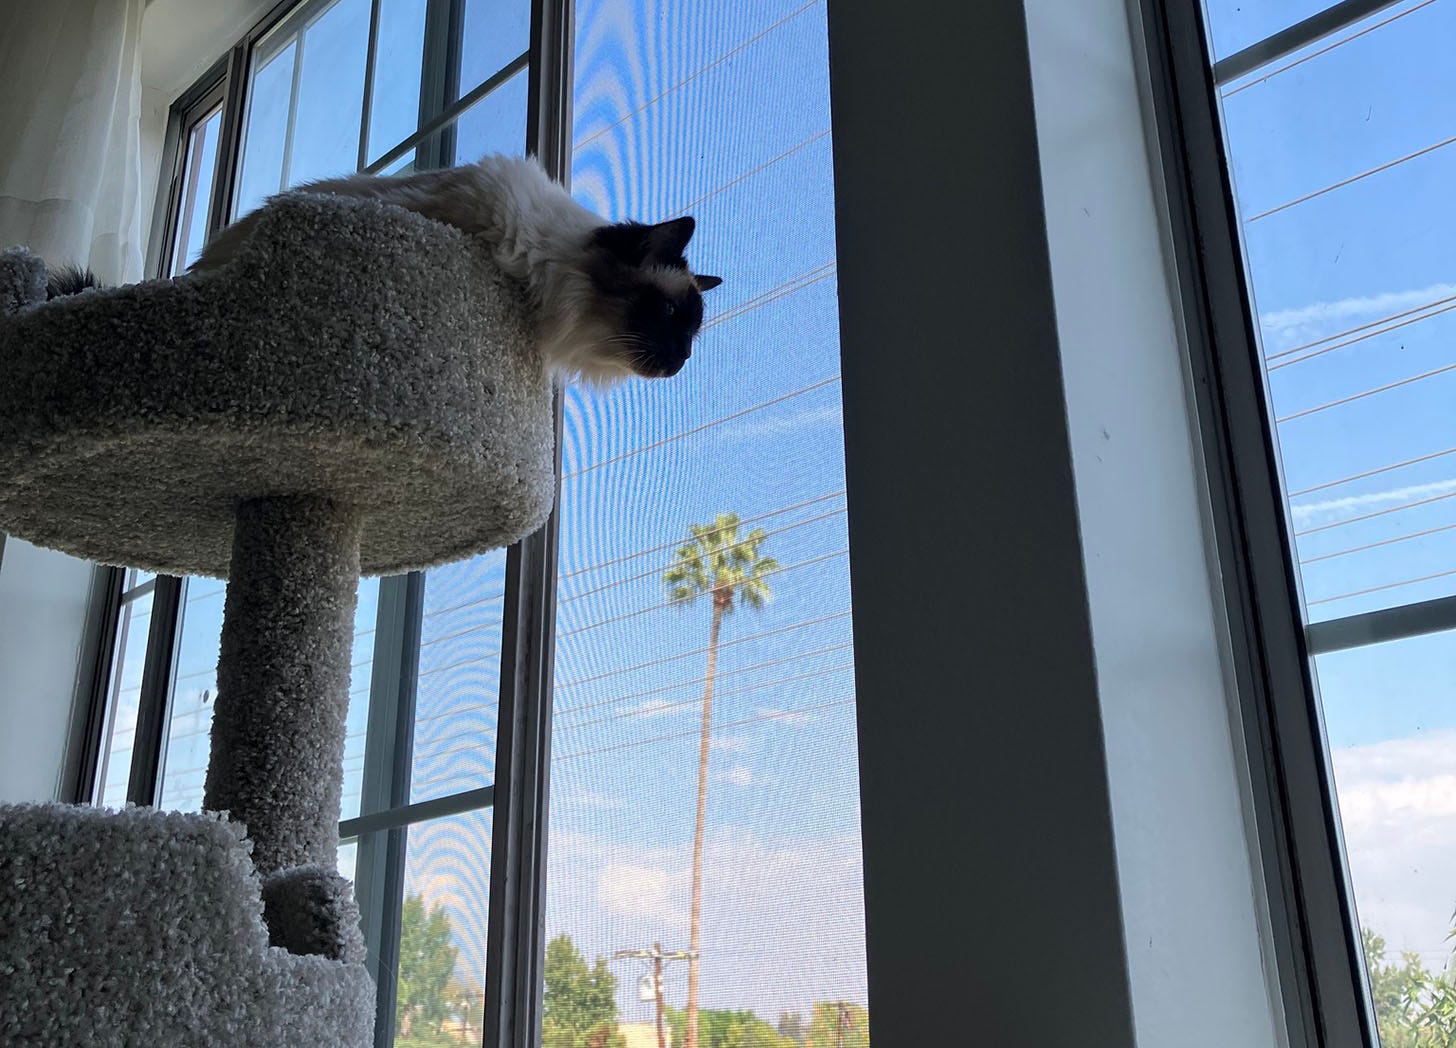 My cat, Dylan, perched on a cat tree and looking through a window with a palm tree in the distance.